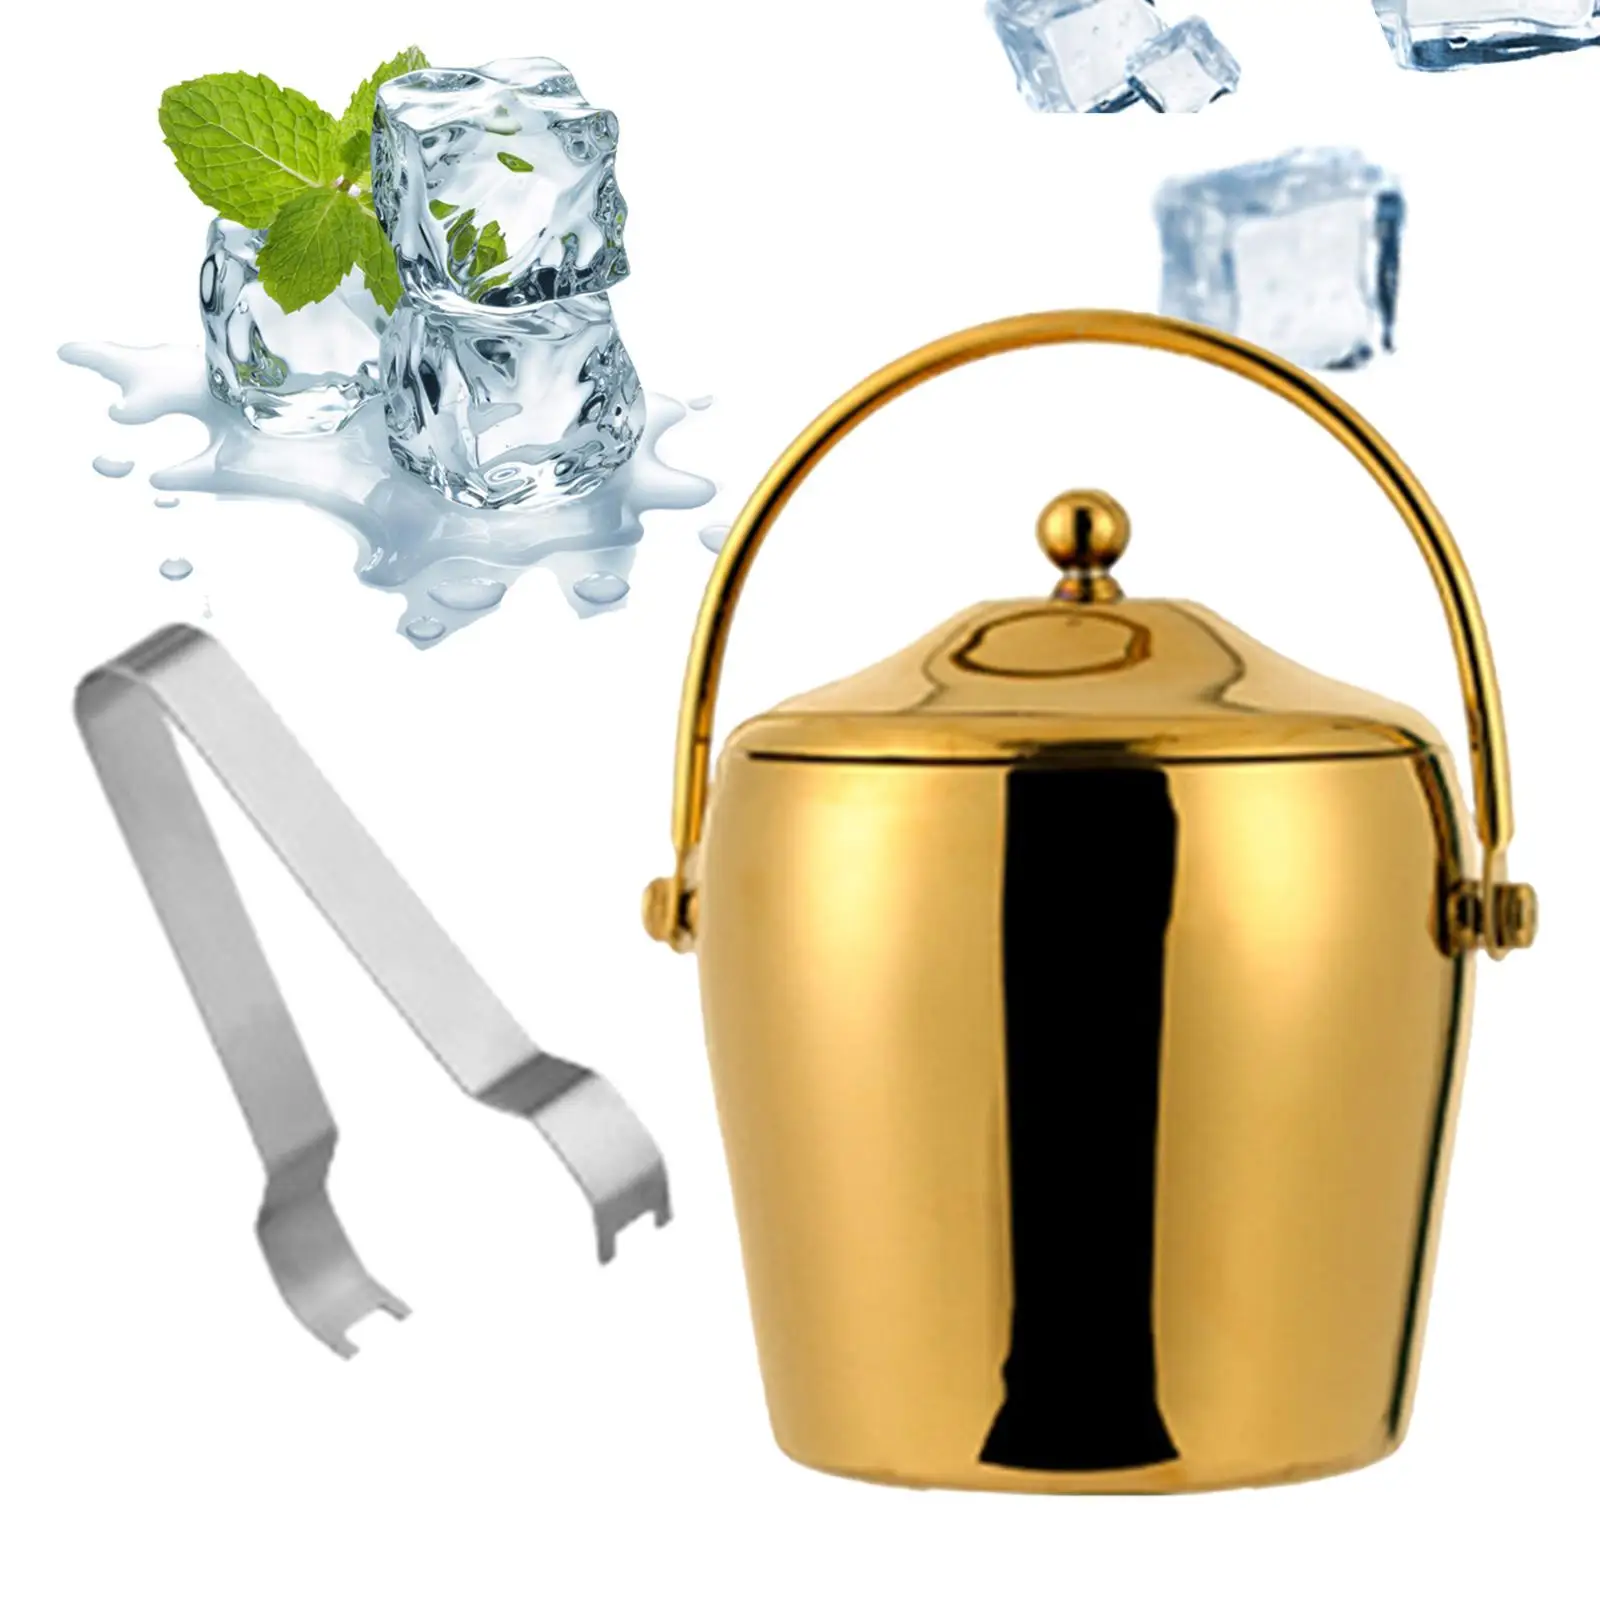 Metal Beverage Tub Fashionable with Handle Champagne Bucket Insulated Ice Bucket for Barbecue Party Bar Household Drinks